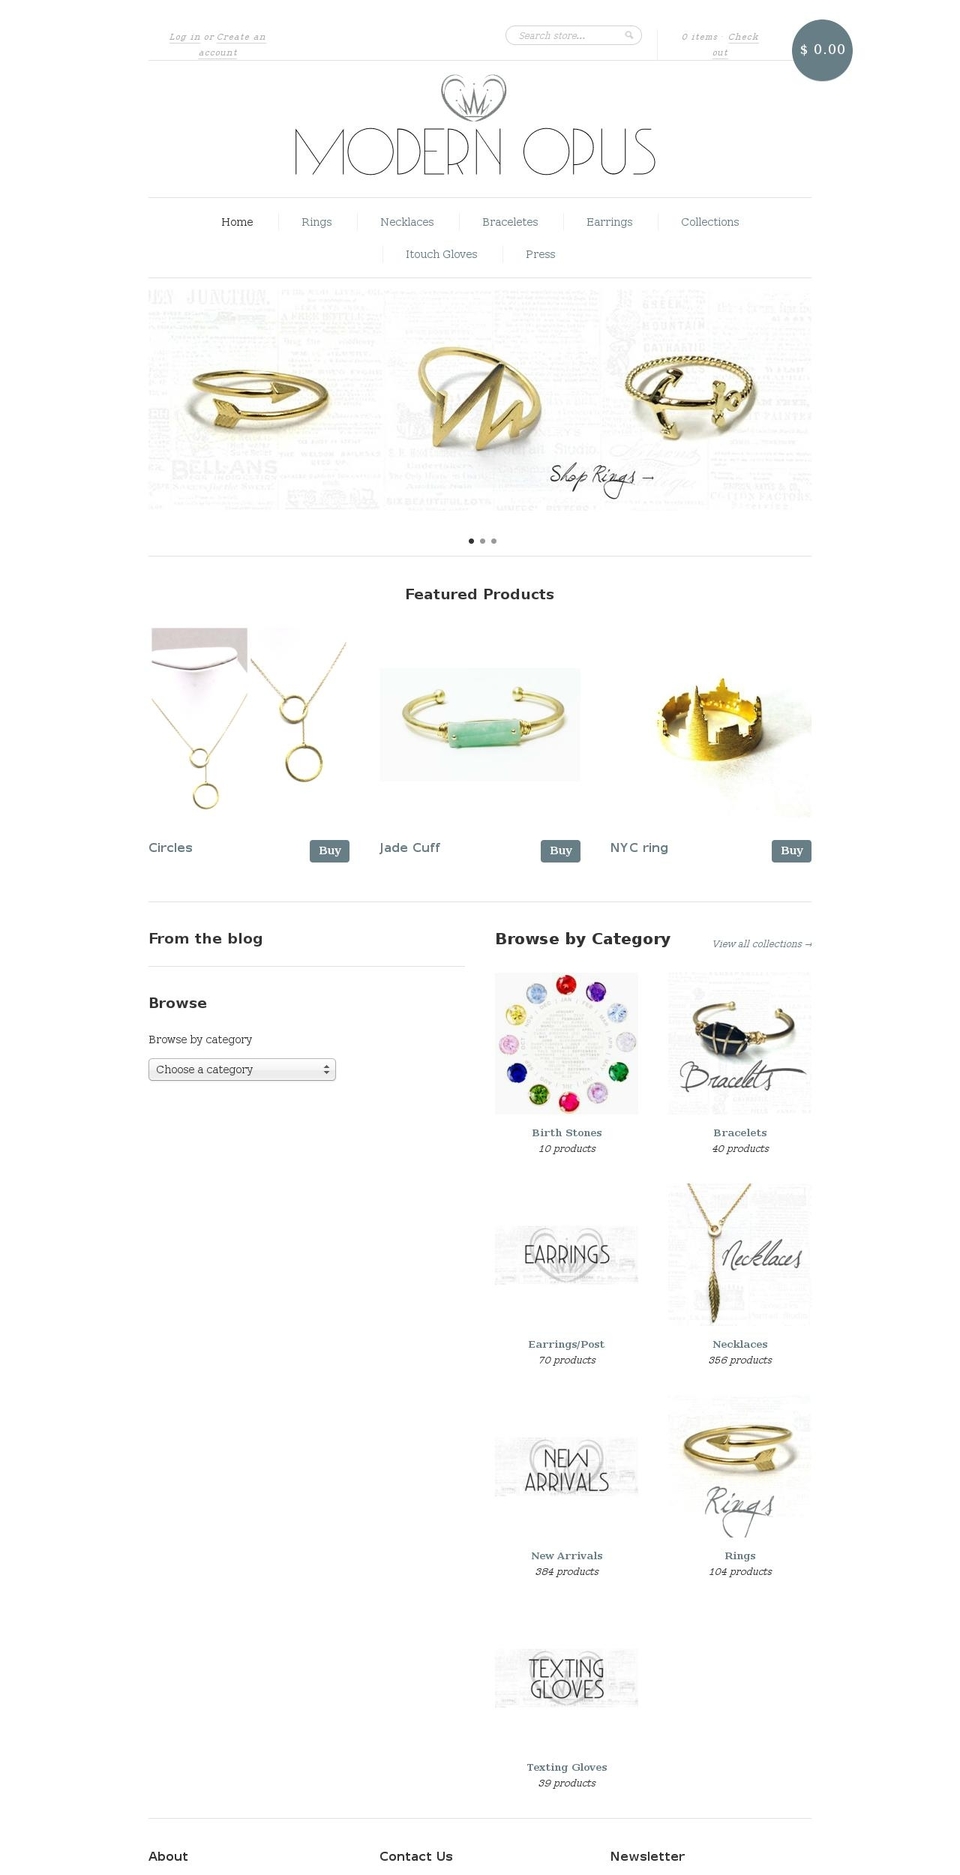 qeretail Shopify theme site example modern-opus.com